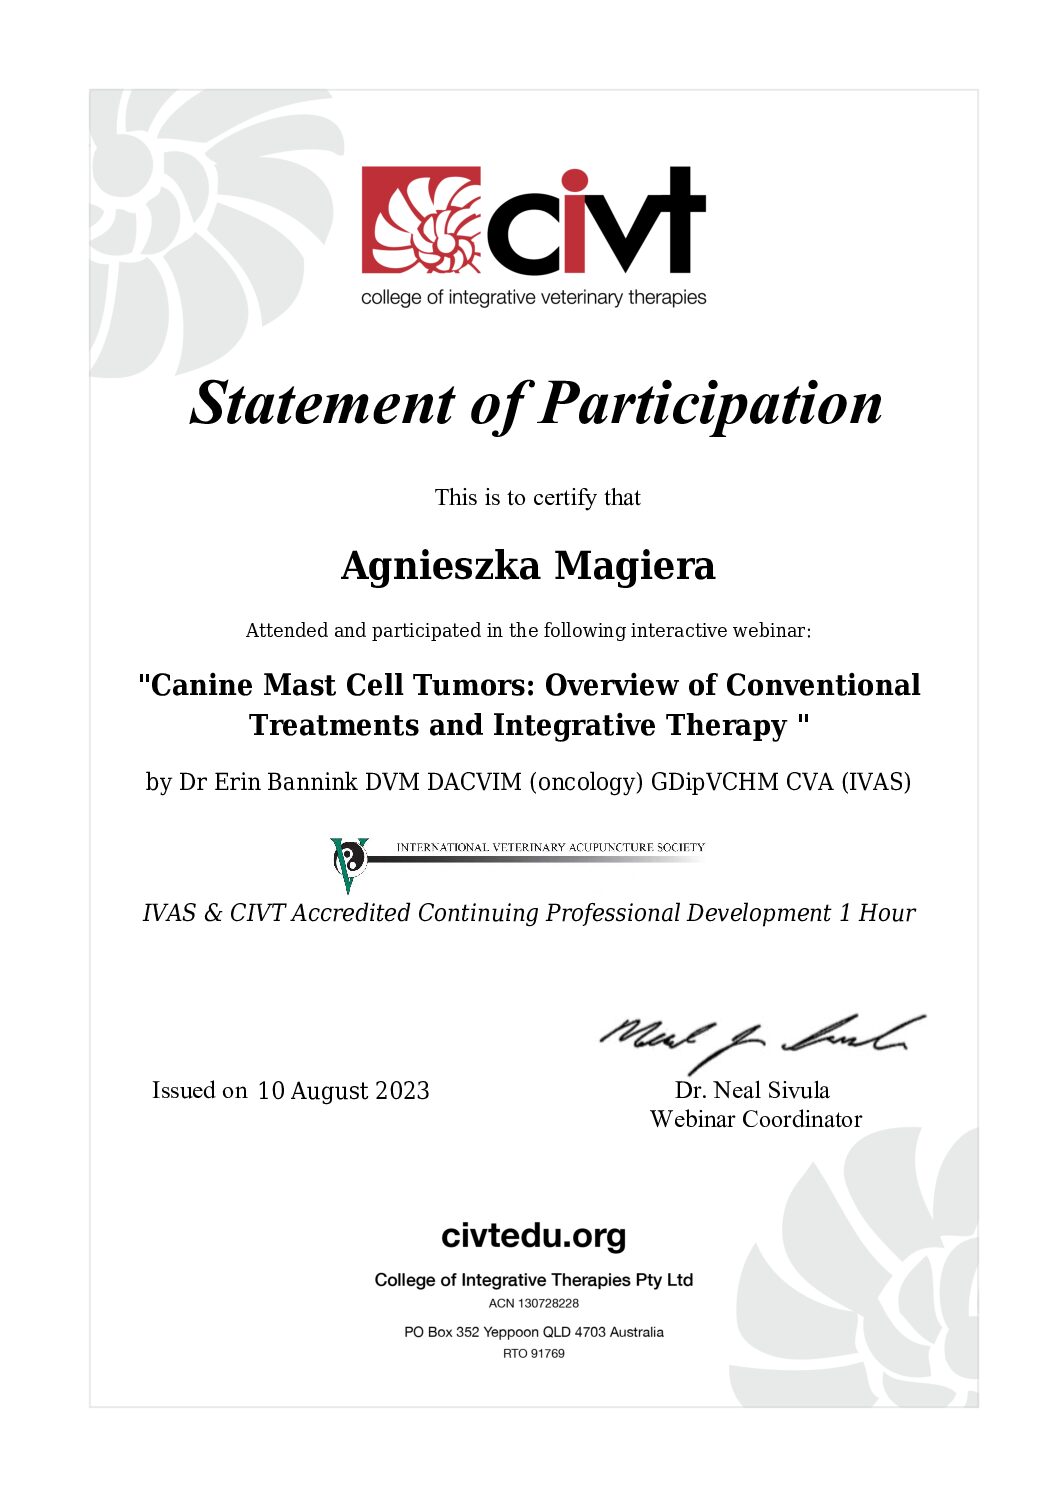 Webinar Certificate - Canine Mast Cell Tumors Overview of Conventional Treatments and Integrative Therapy Agnieszka Magiera 391711210